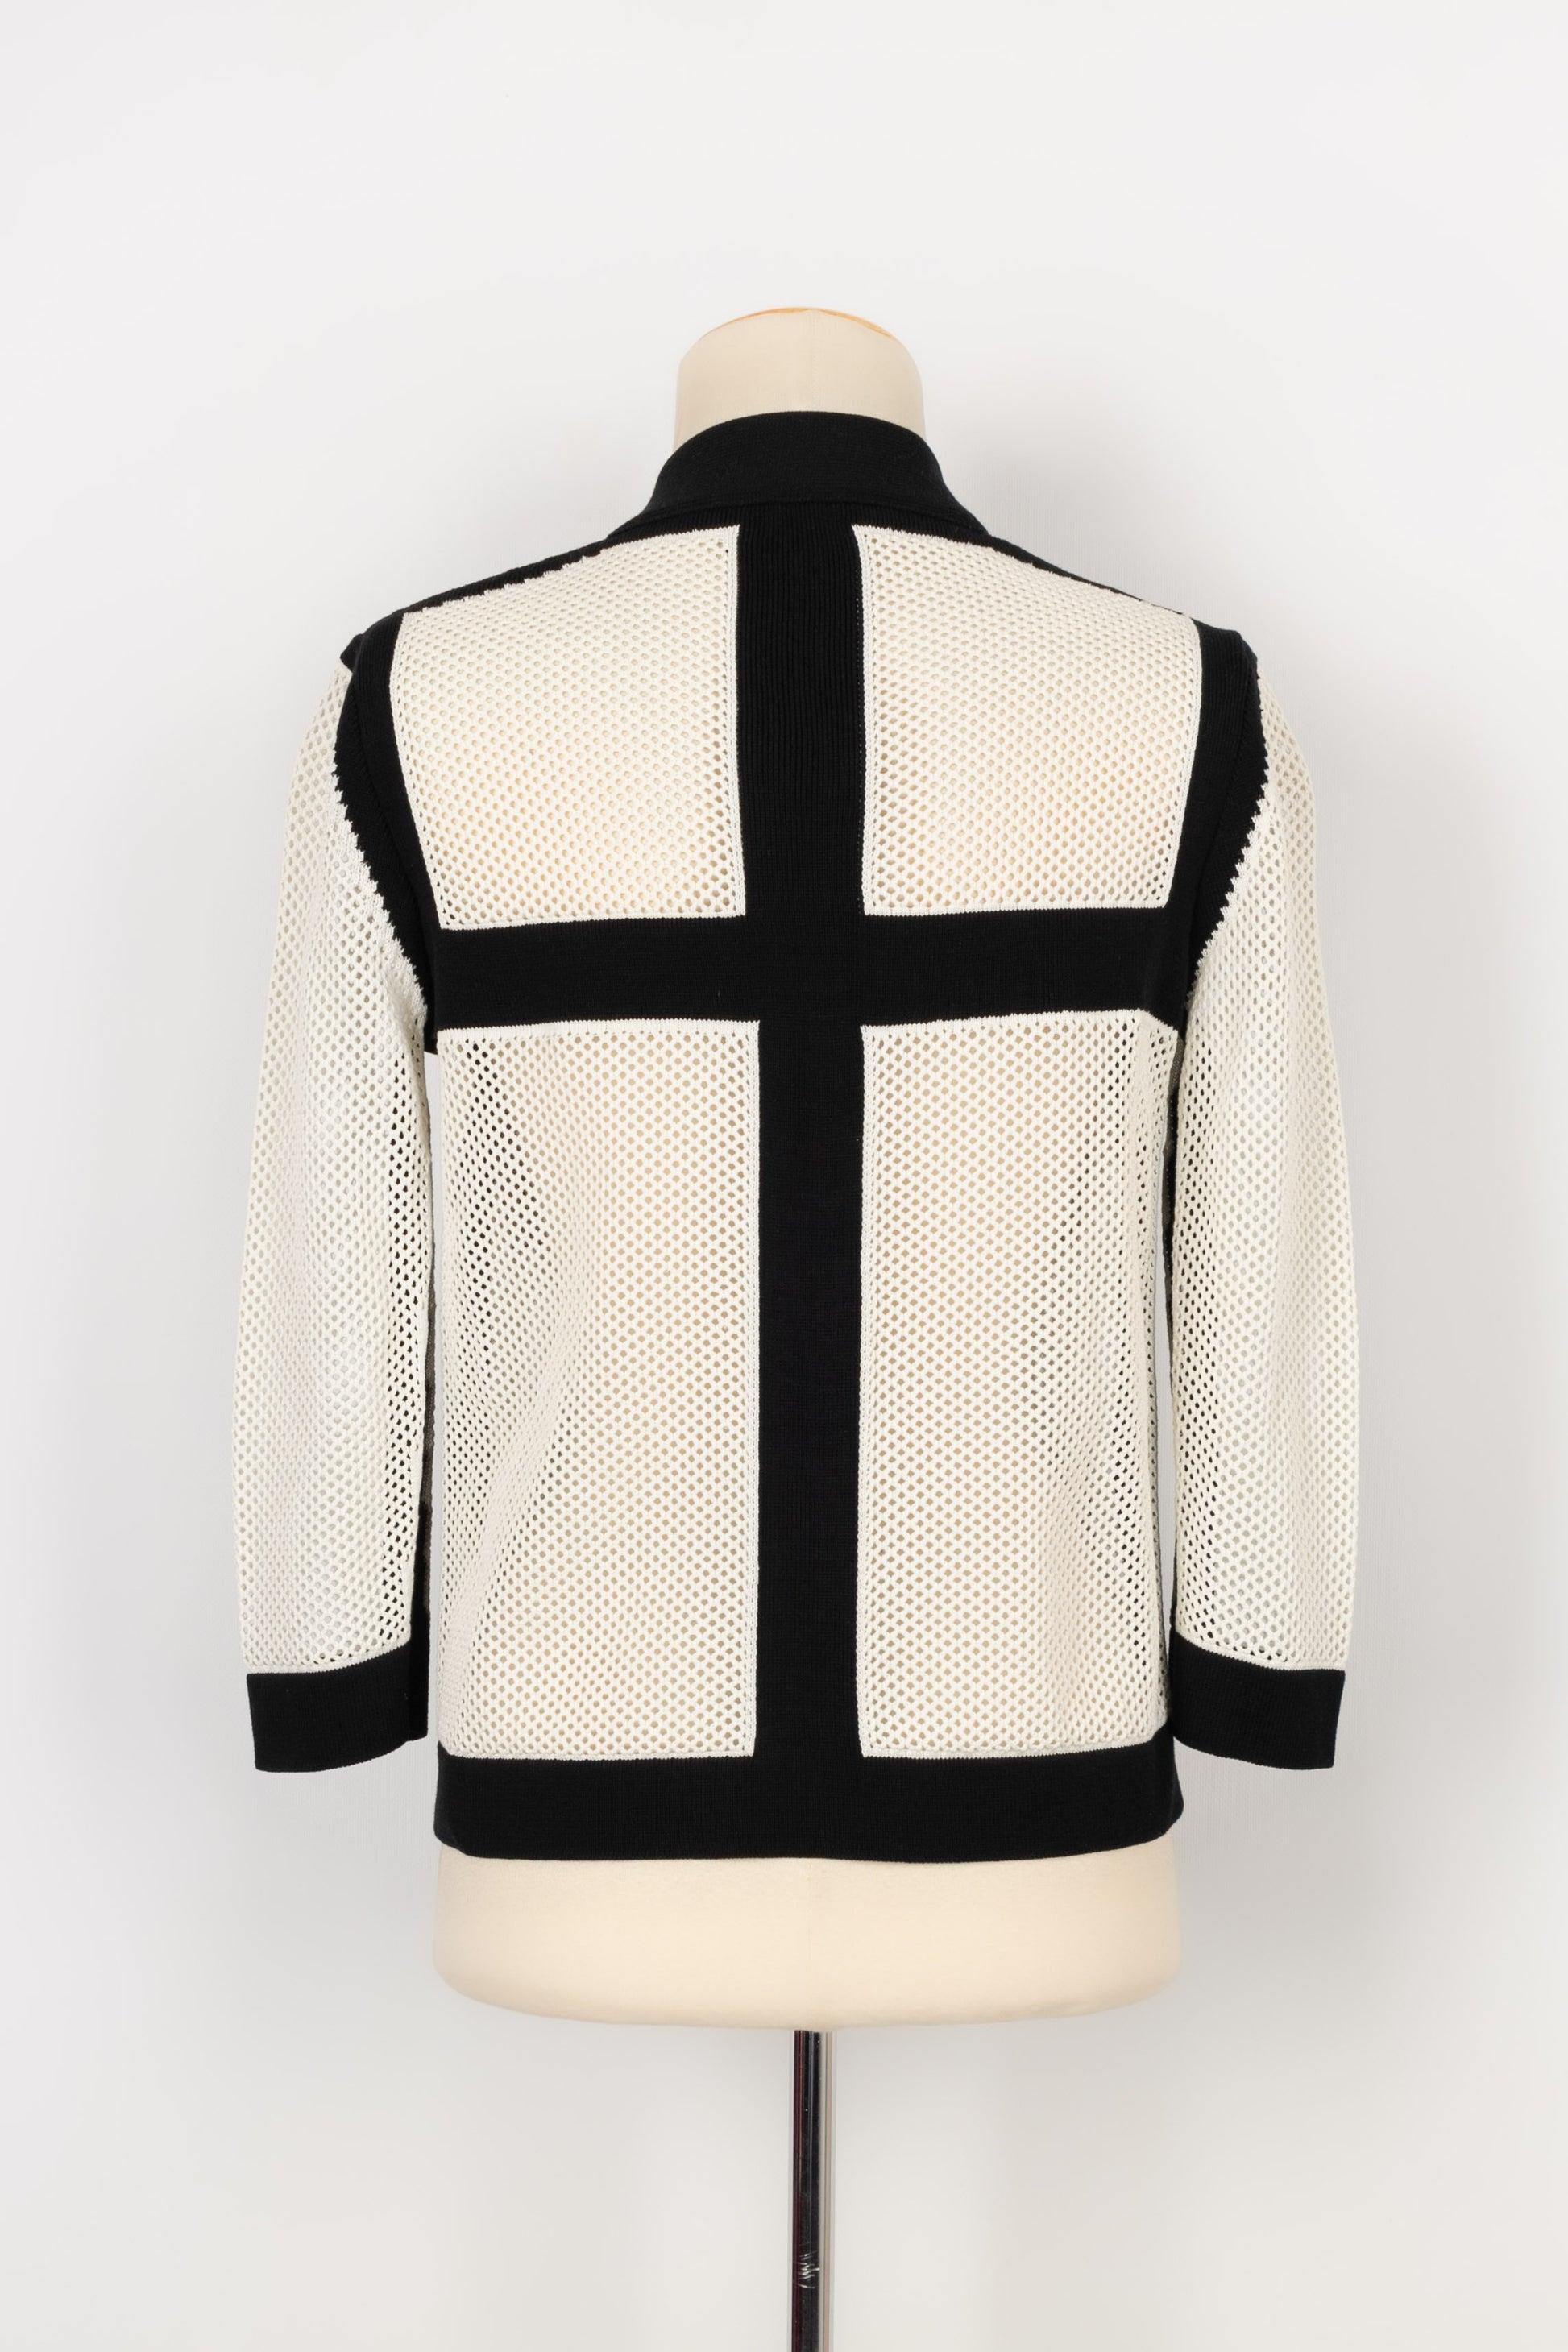 Beige Chanel Jacket-Style Zipped Top in Black and White Mesh For Sale